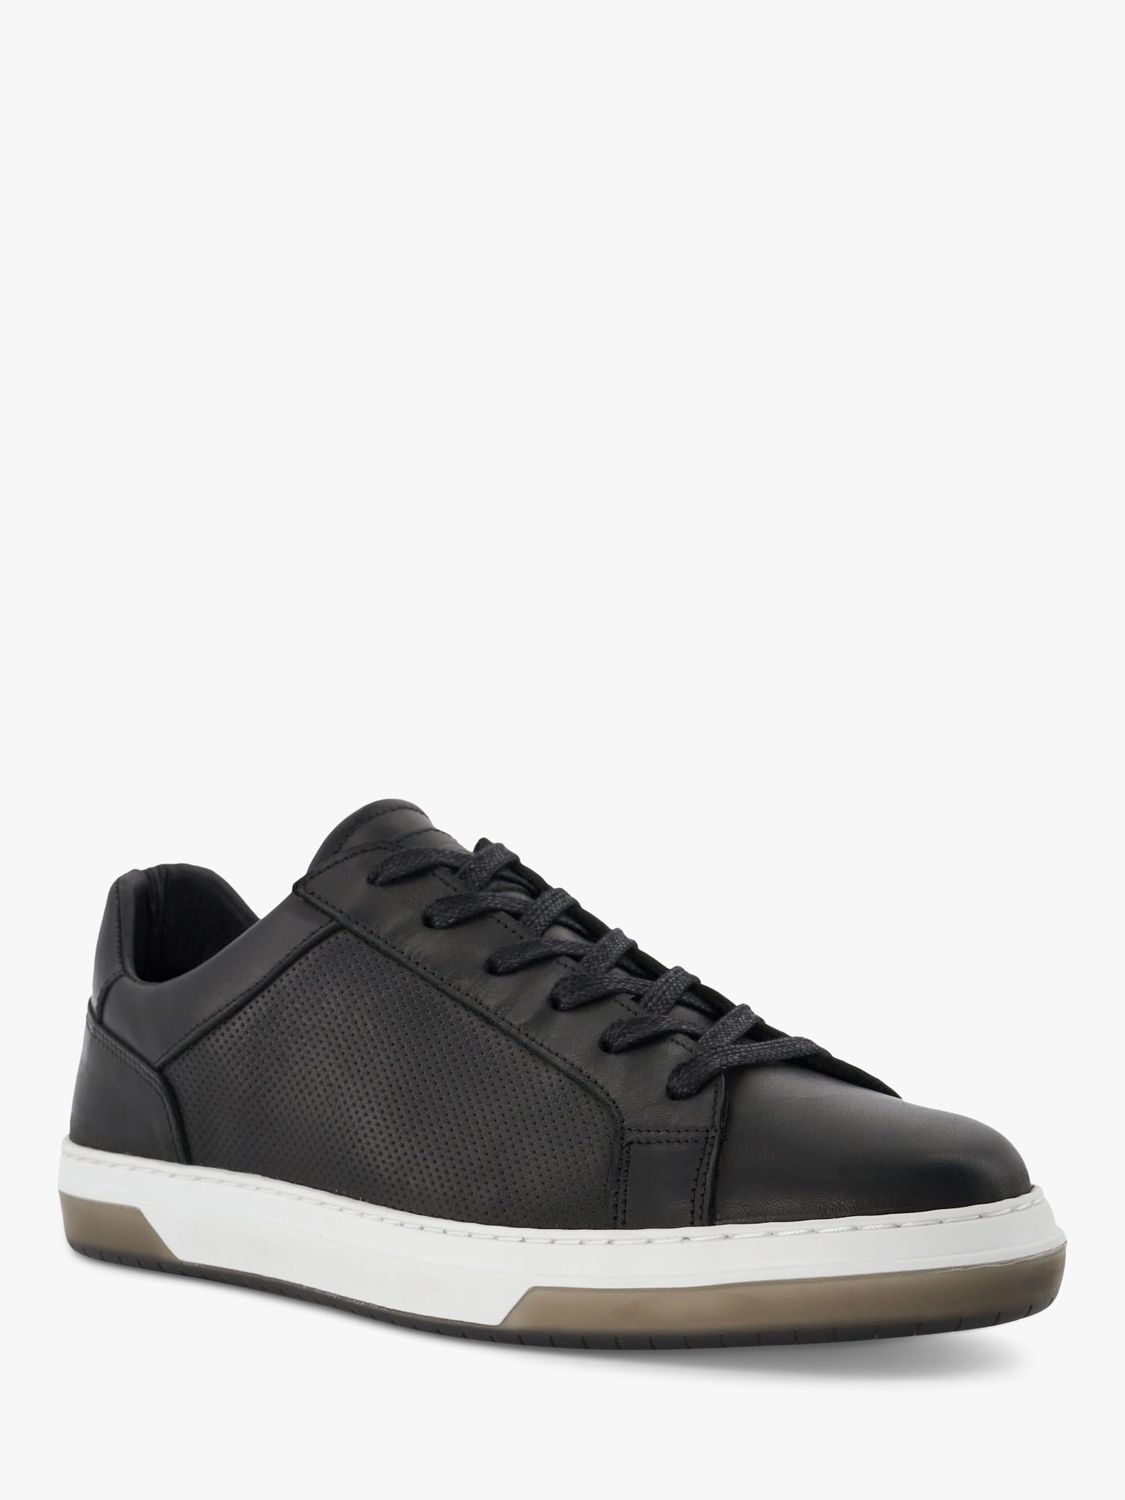 Dune Tie Leather Black Trainers, Black-leather at John Lewis & Partners